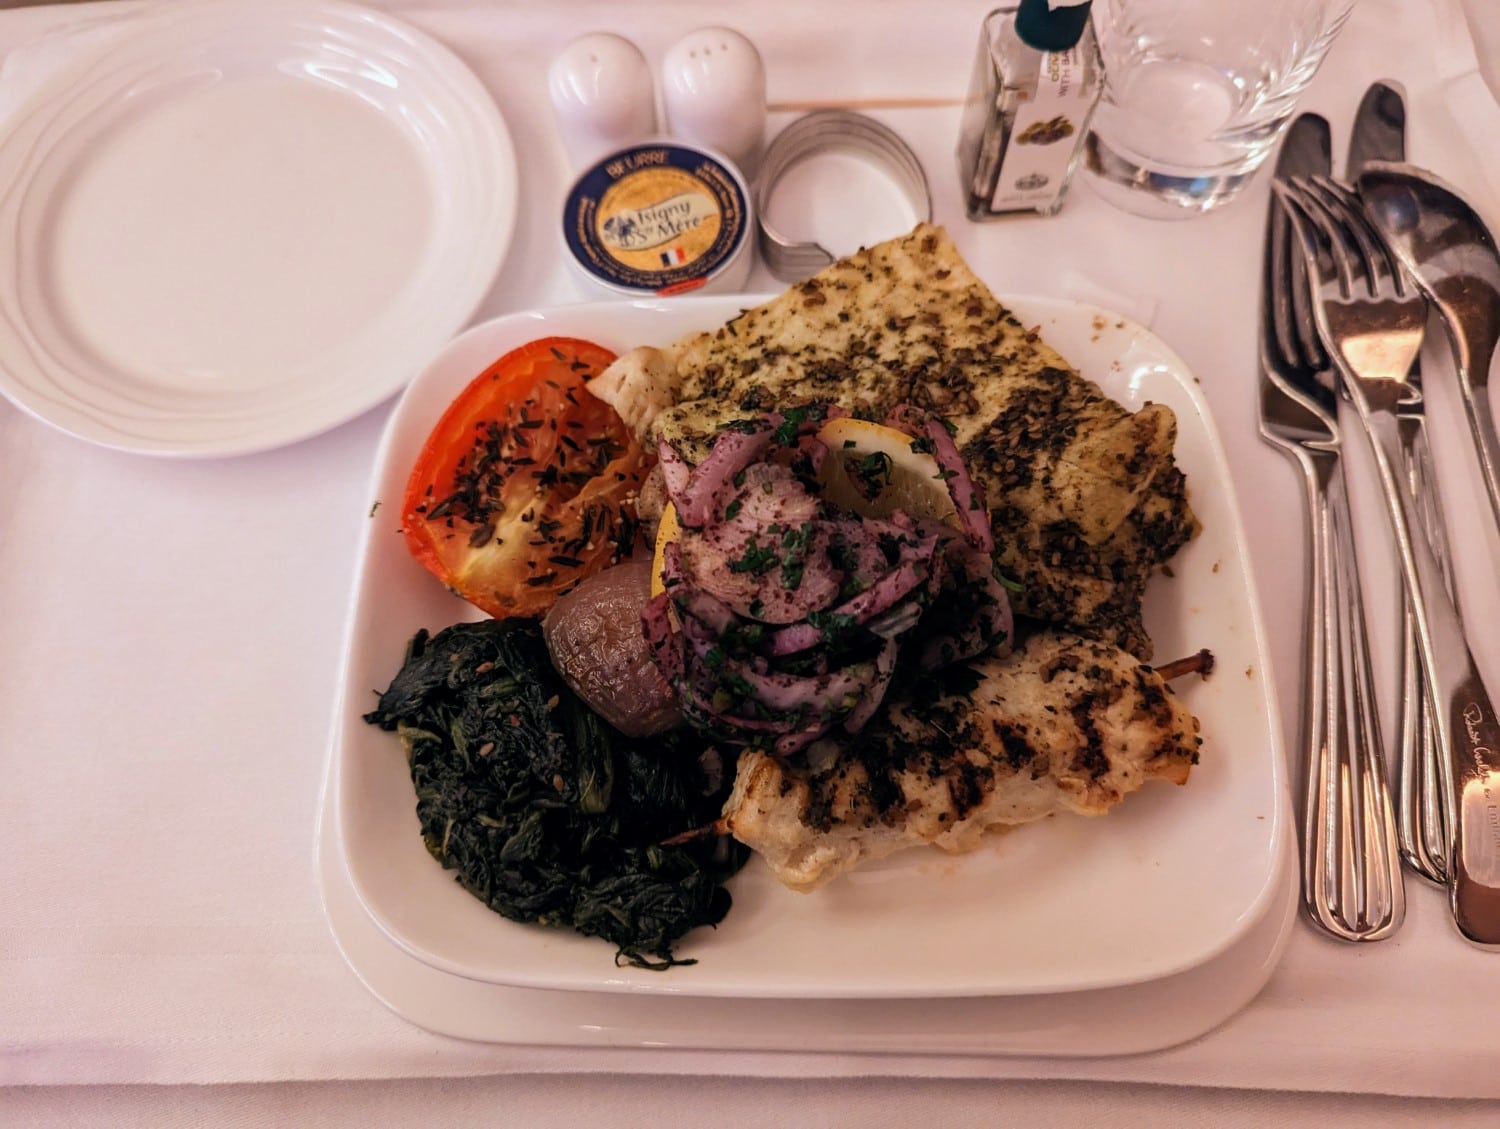 Mixed grill lunch on board the Emirates A380 business class.